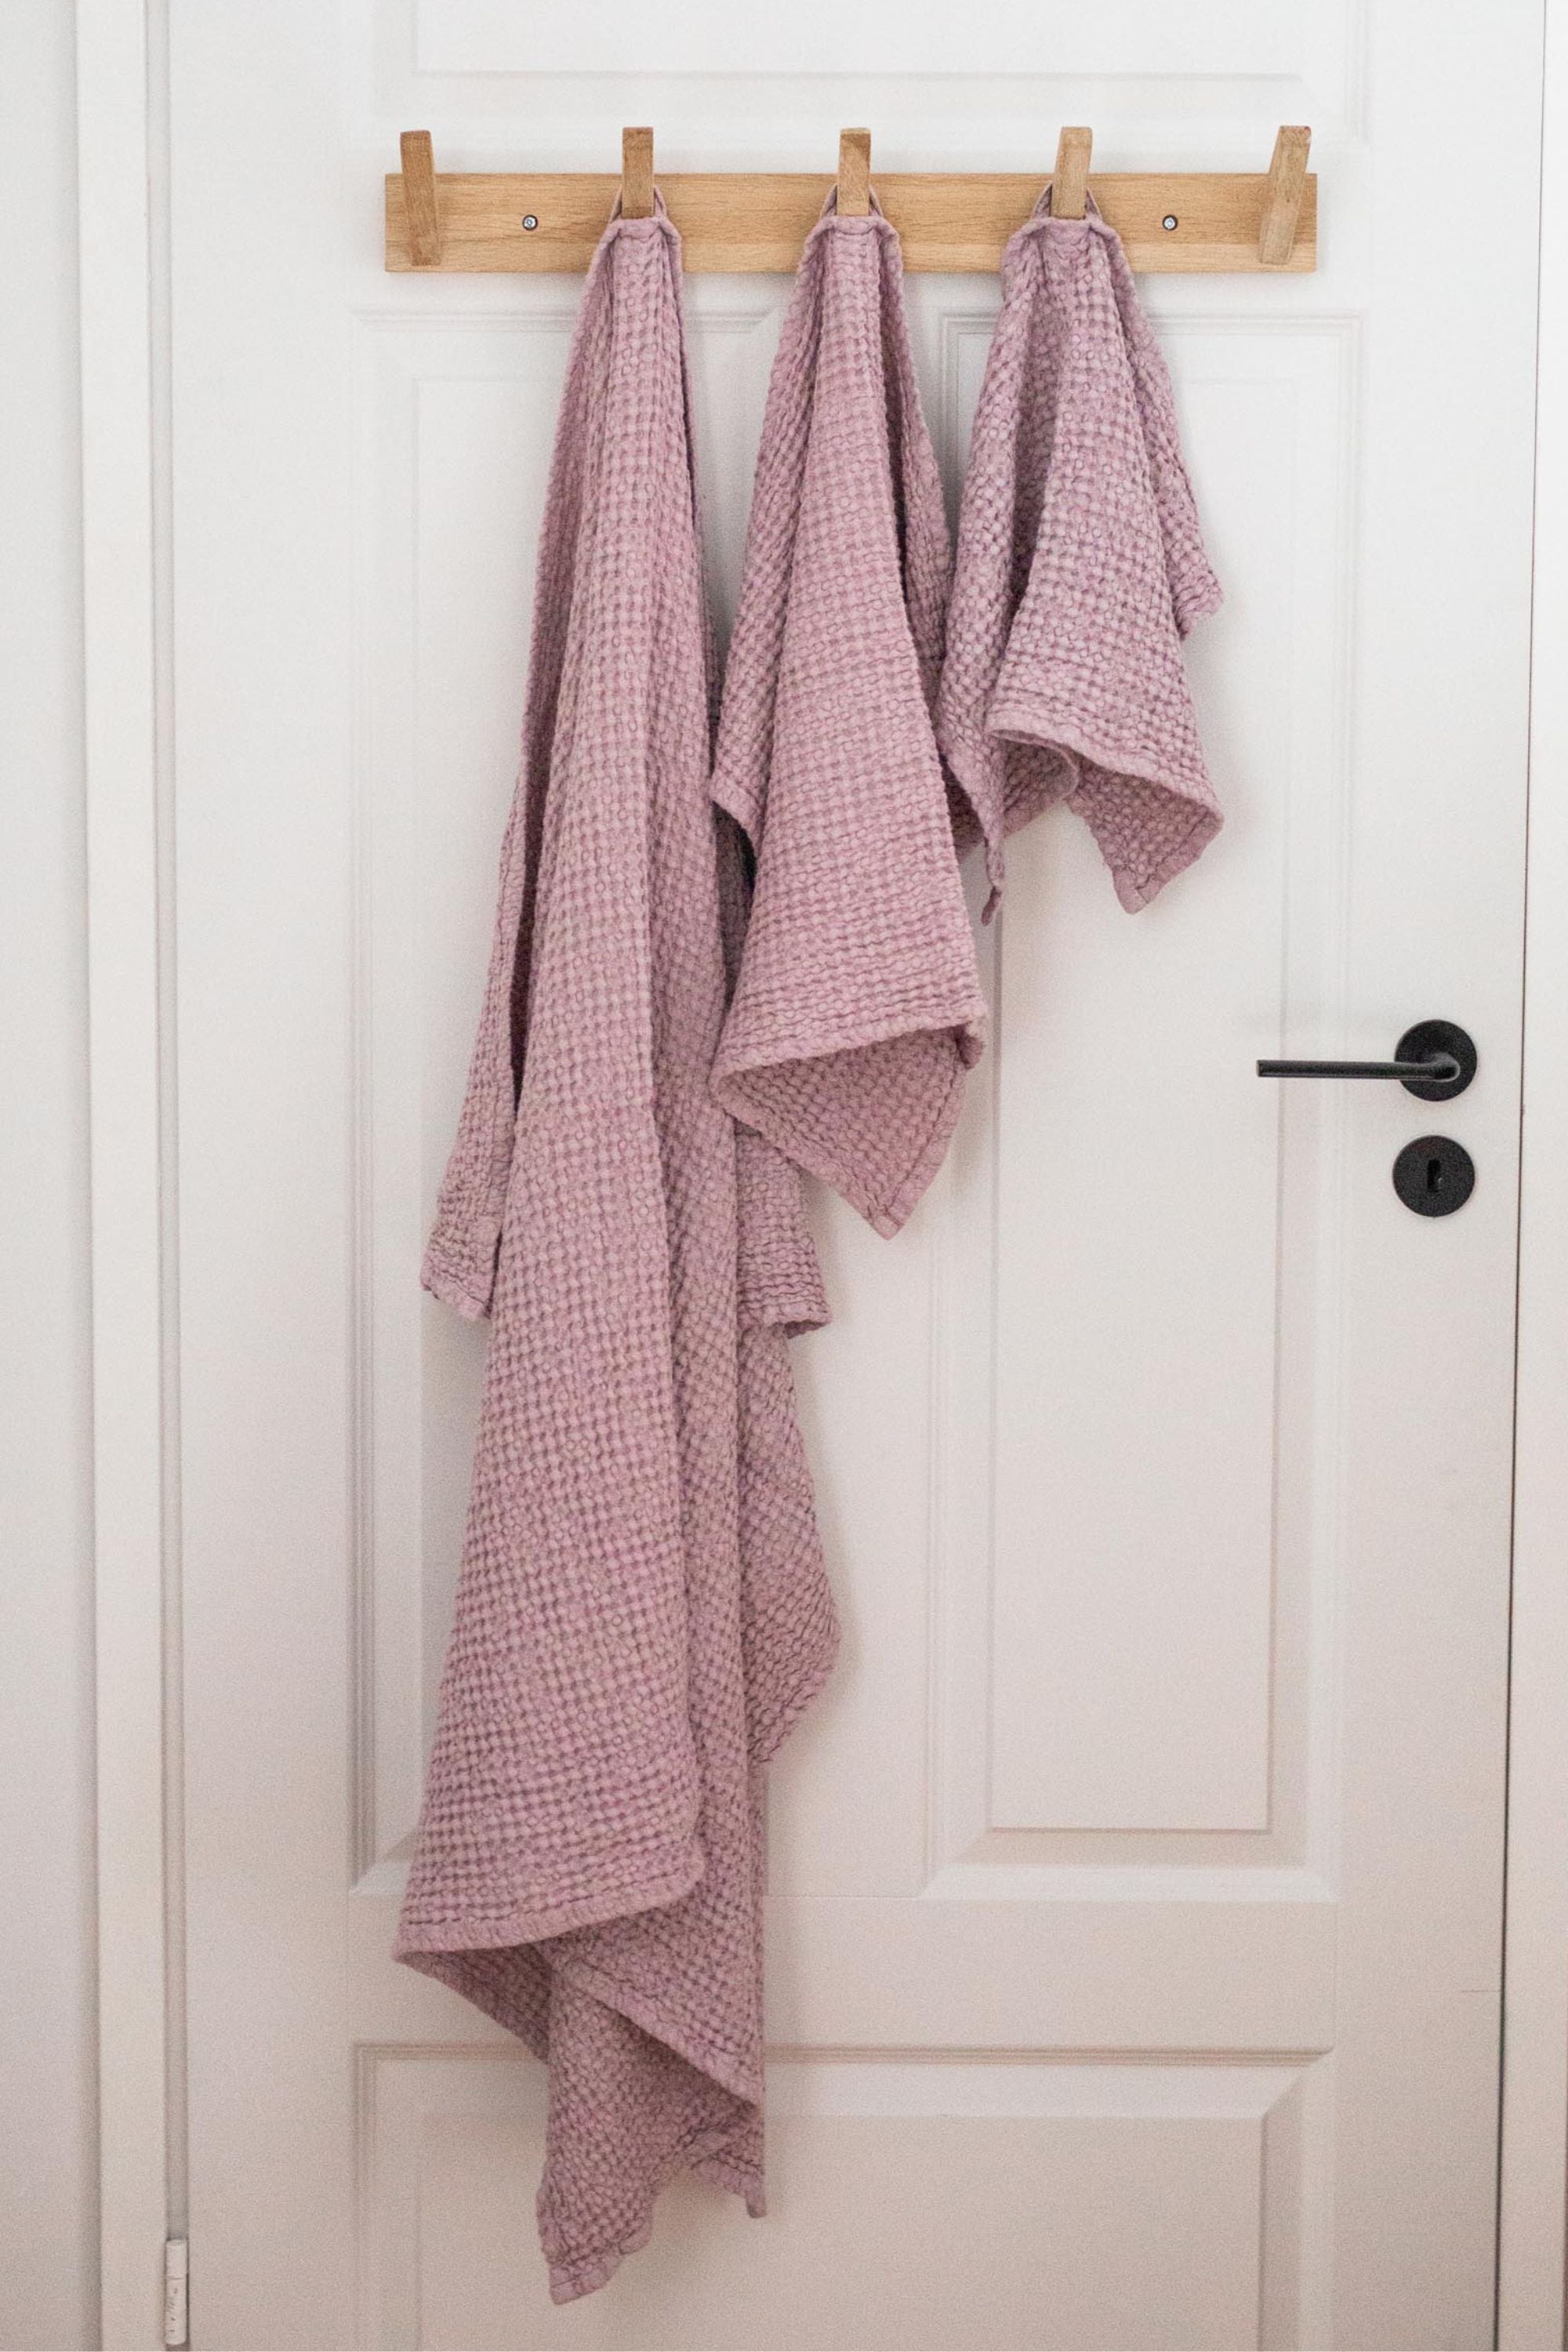 Cotton Candy Linen Waffle Bath Towels By AmourlInen